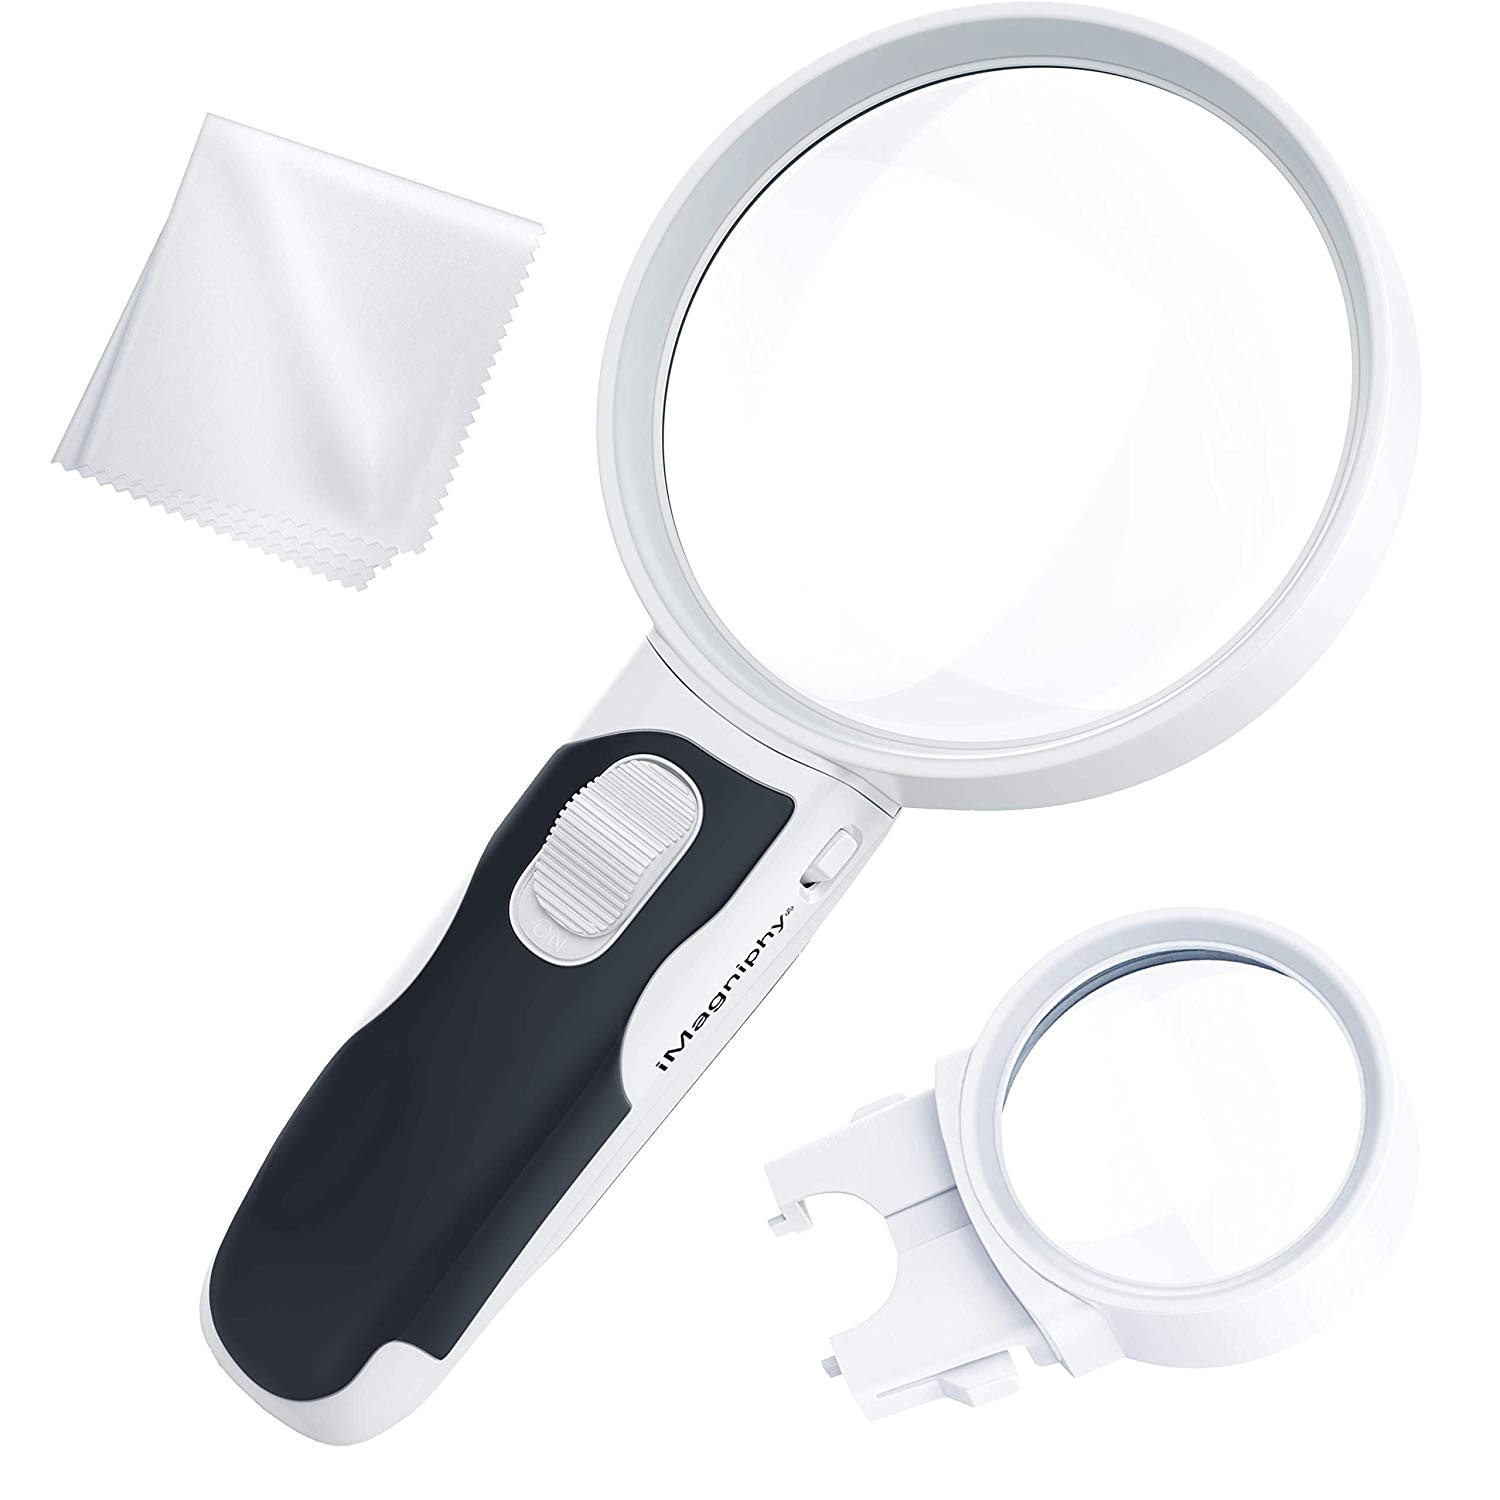 hands free magnifying glass for crafts inspirational amazon led magnifying glass 10x 5x illuminated 2 lens